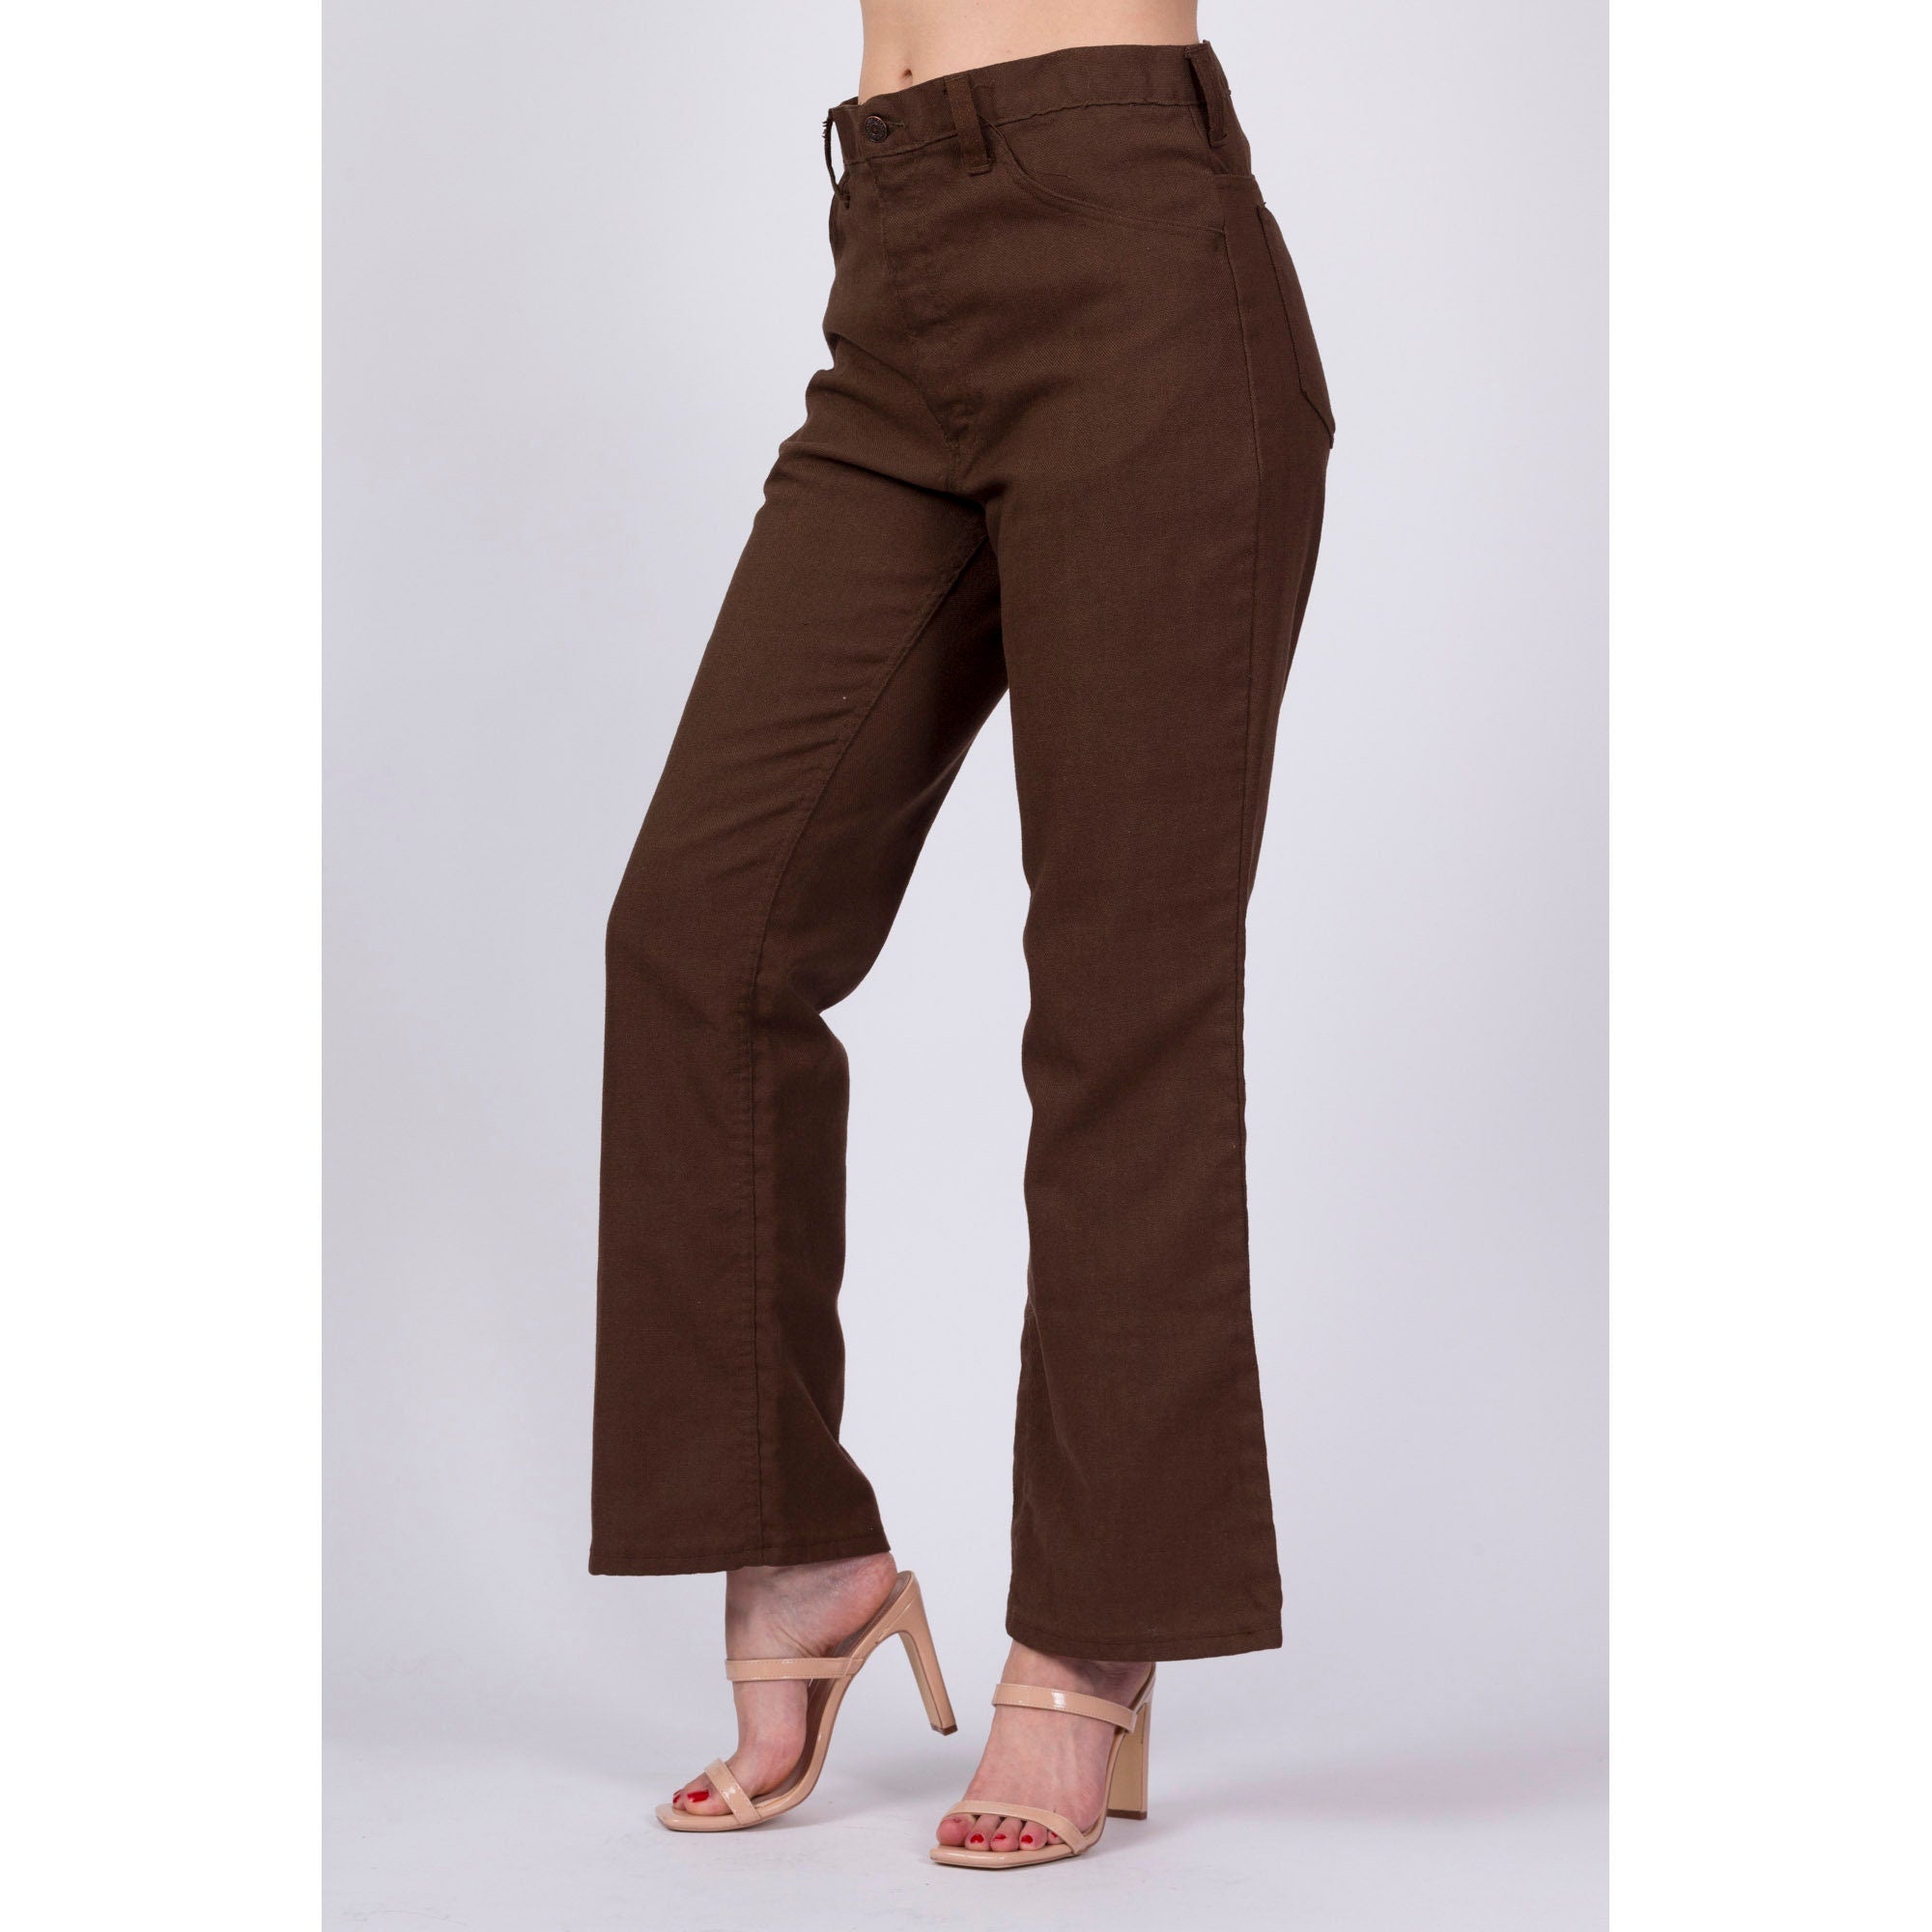 Vintage High Waisted Mens Formal Trousers Sale With Pockets Slim Fit Office  Trousers For Formal Business Style From Cozycomfy21, $29.19 | DHgate.Com